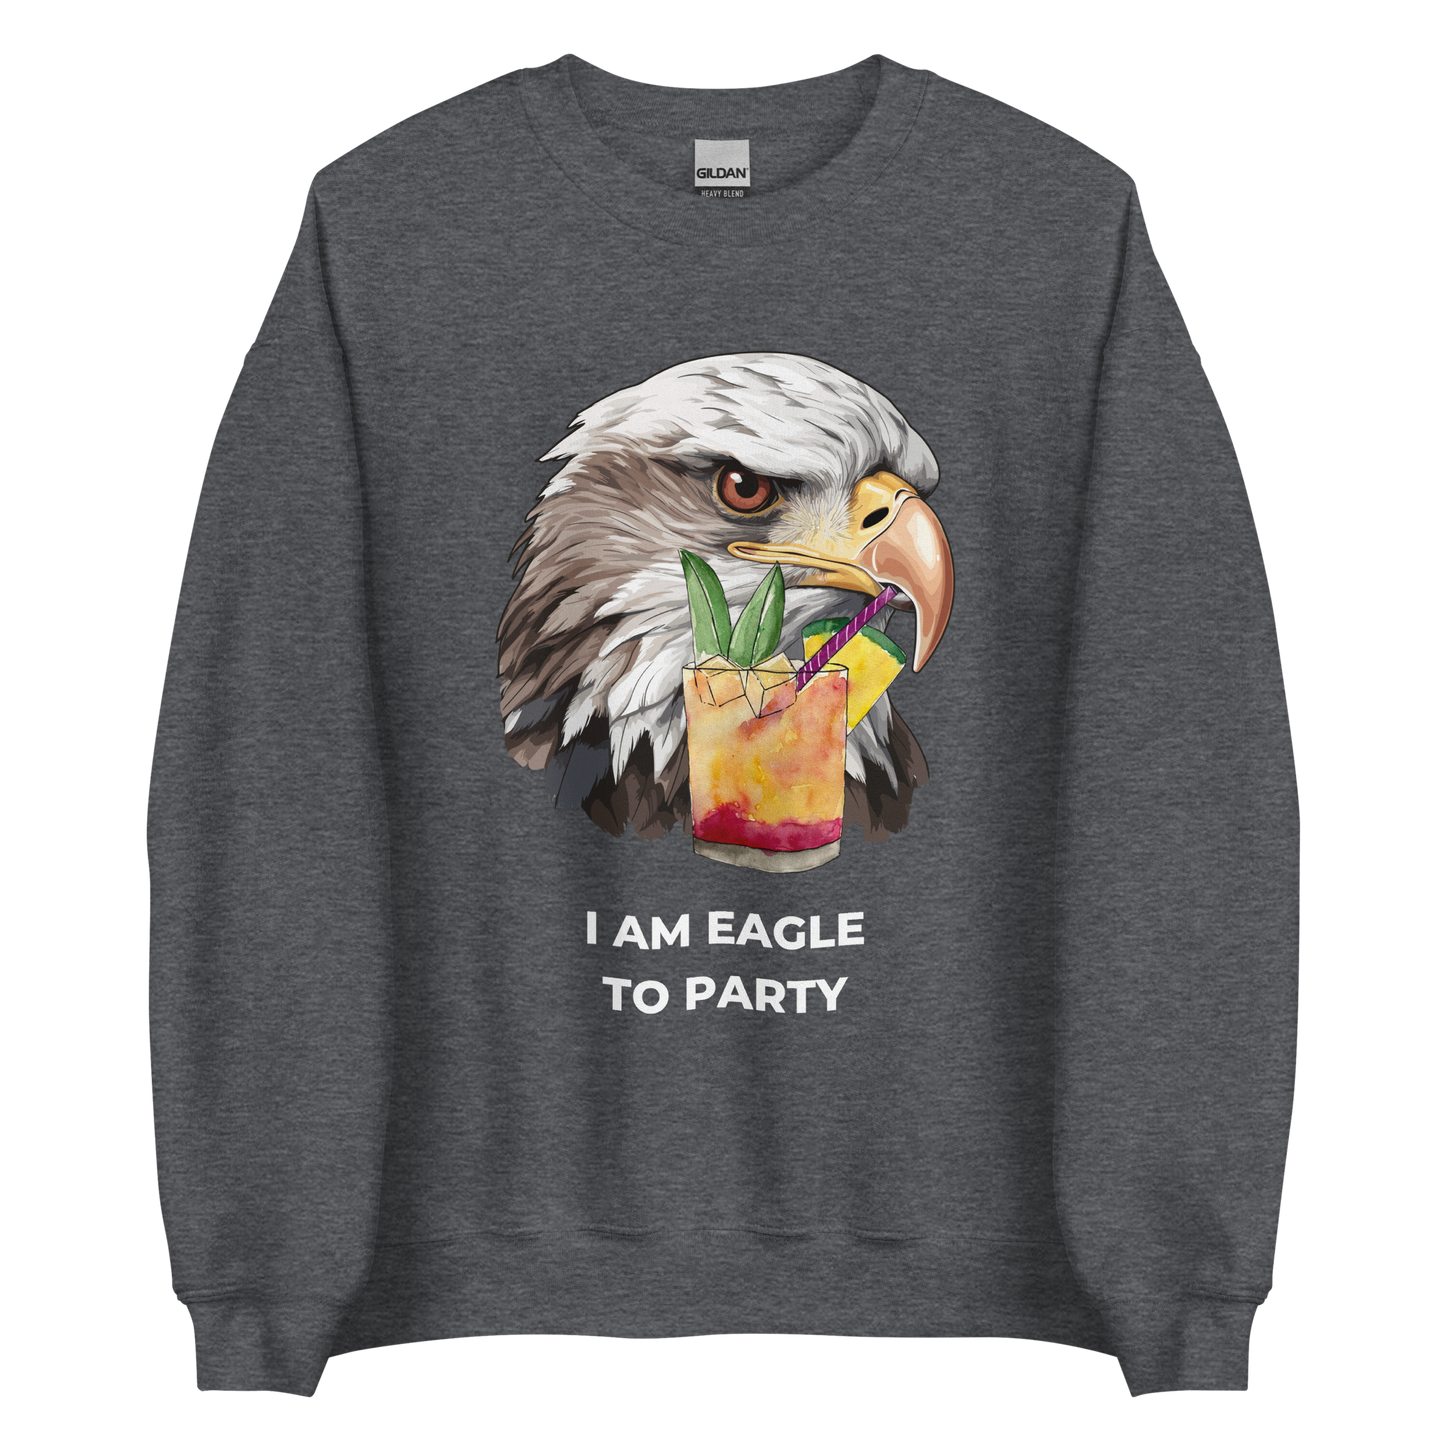 Dark Heather Eagle Sweatshirt featuring a vibrant I Am Eagle To Party graphic on the chest - Funny Graphic Eagle Sweatshirts - Boozy Fox